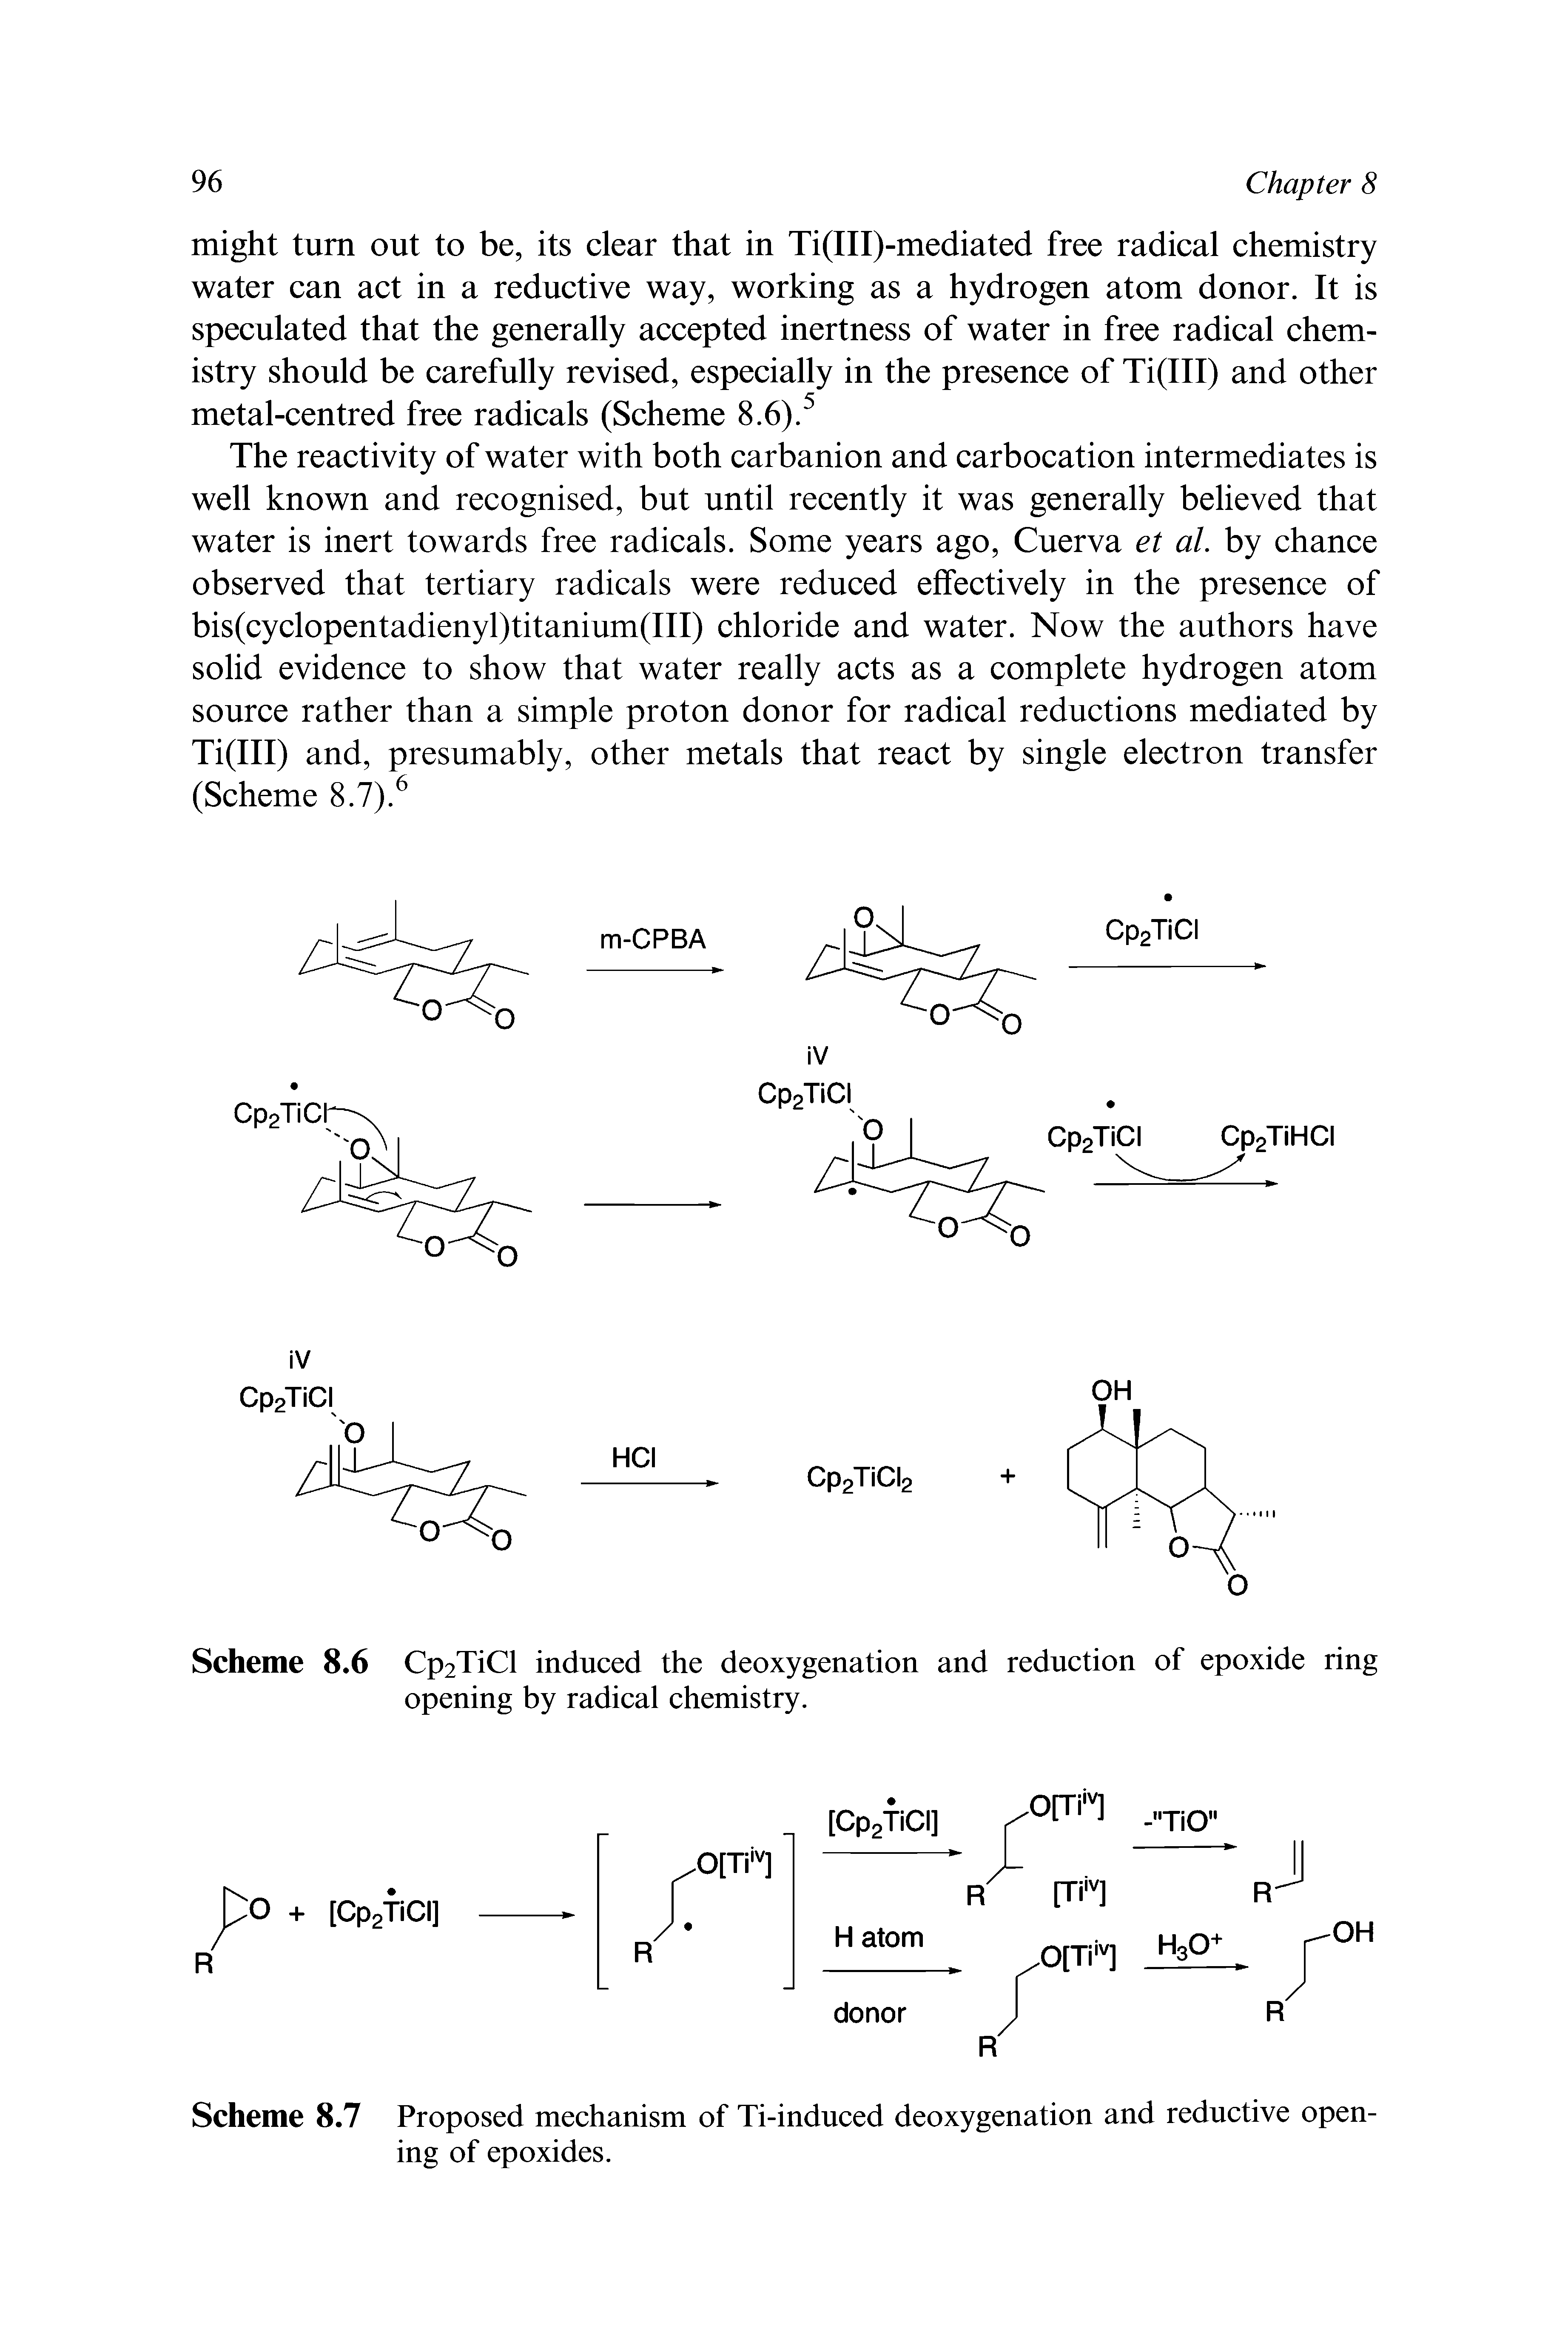 Scheme 8.7 Proposed mechanism of Ti-induced deoxygenation and reductive opening of epoxides.